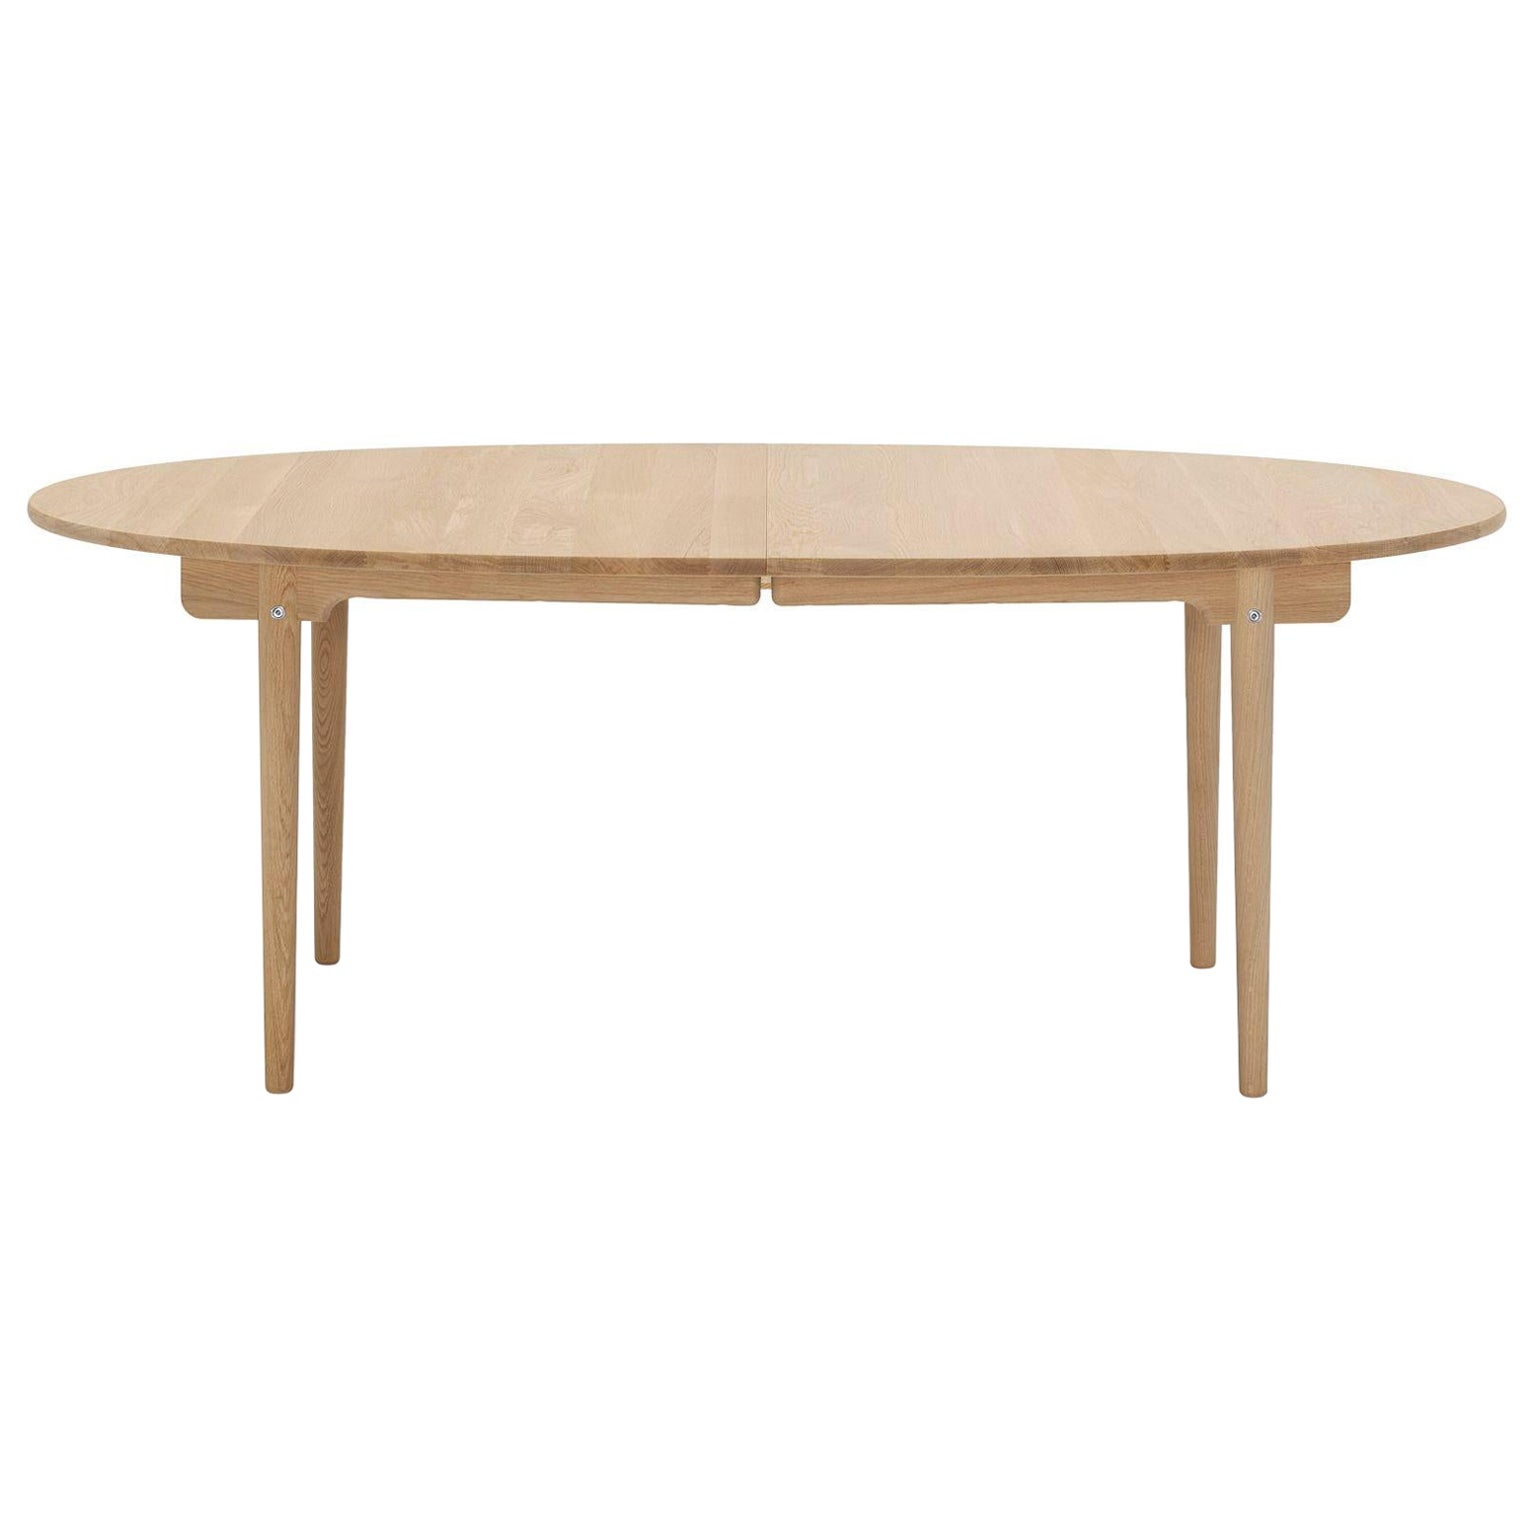 CH338 Dining Table with Oak Oil Finish (Leaf Inserts Sold Separately)